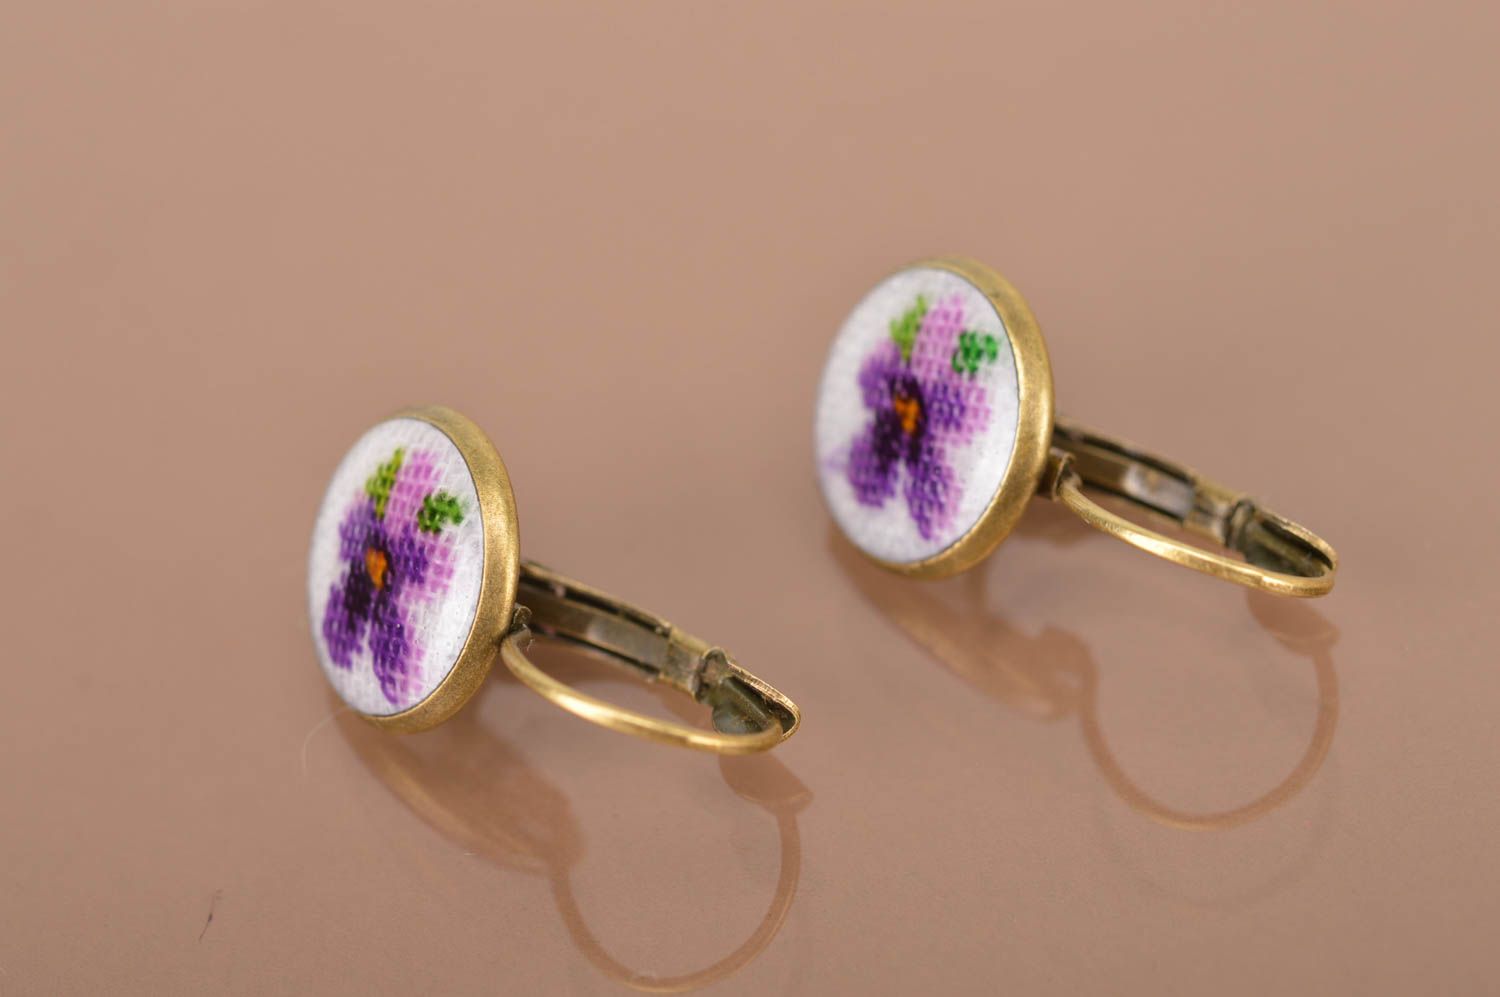 Fashion earrings flower jewelry designer accessories vintage jewelry gift ideas photo 5